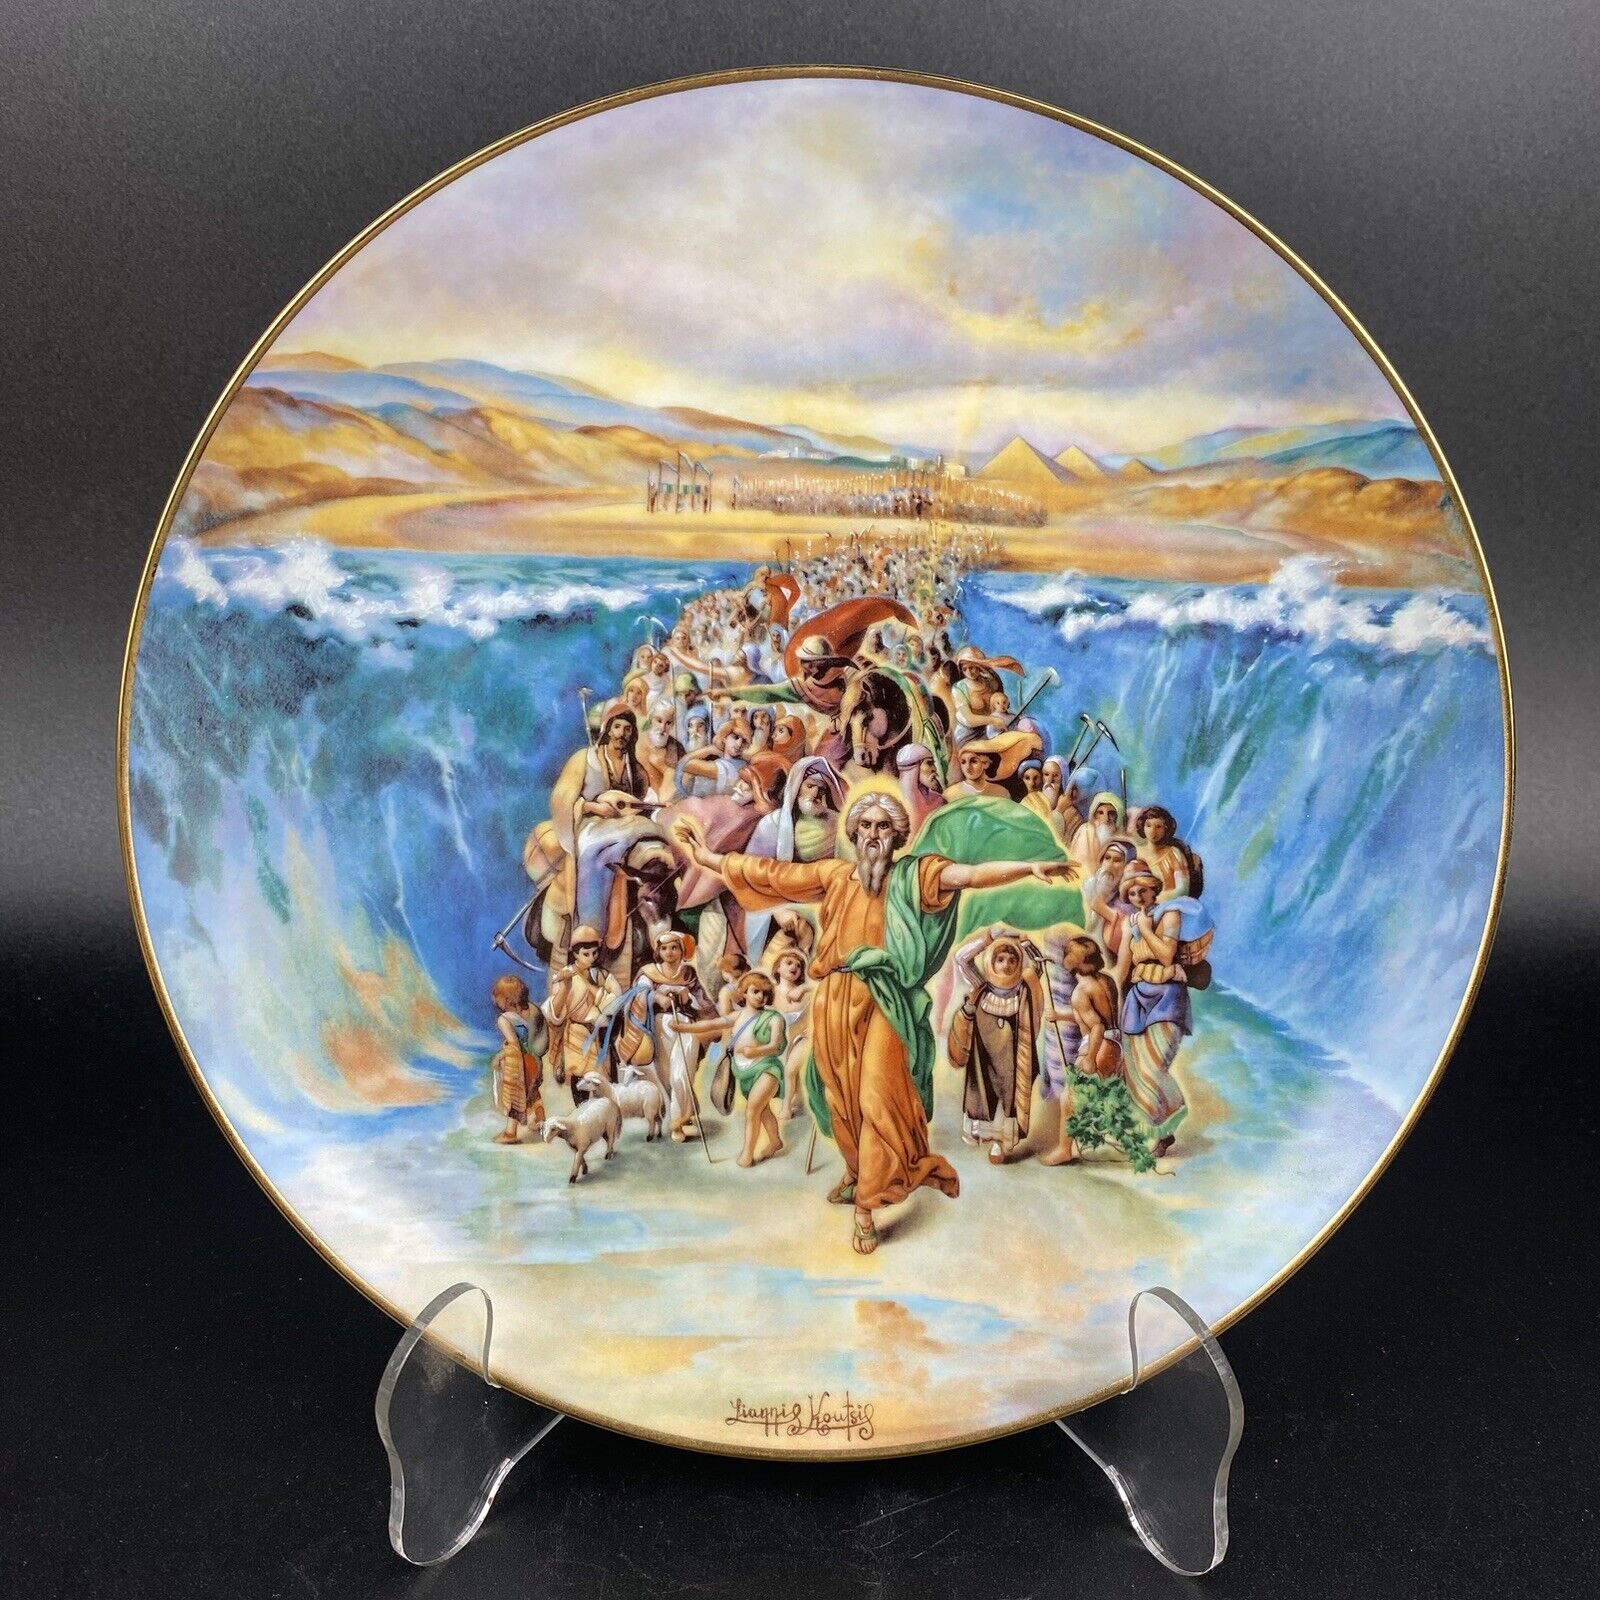 Royal Cornwall 1980 Yiannis Koutsis display plate Parting of the Red Sea